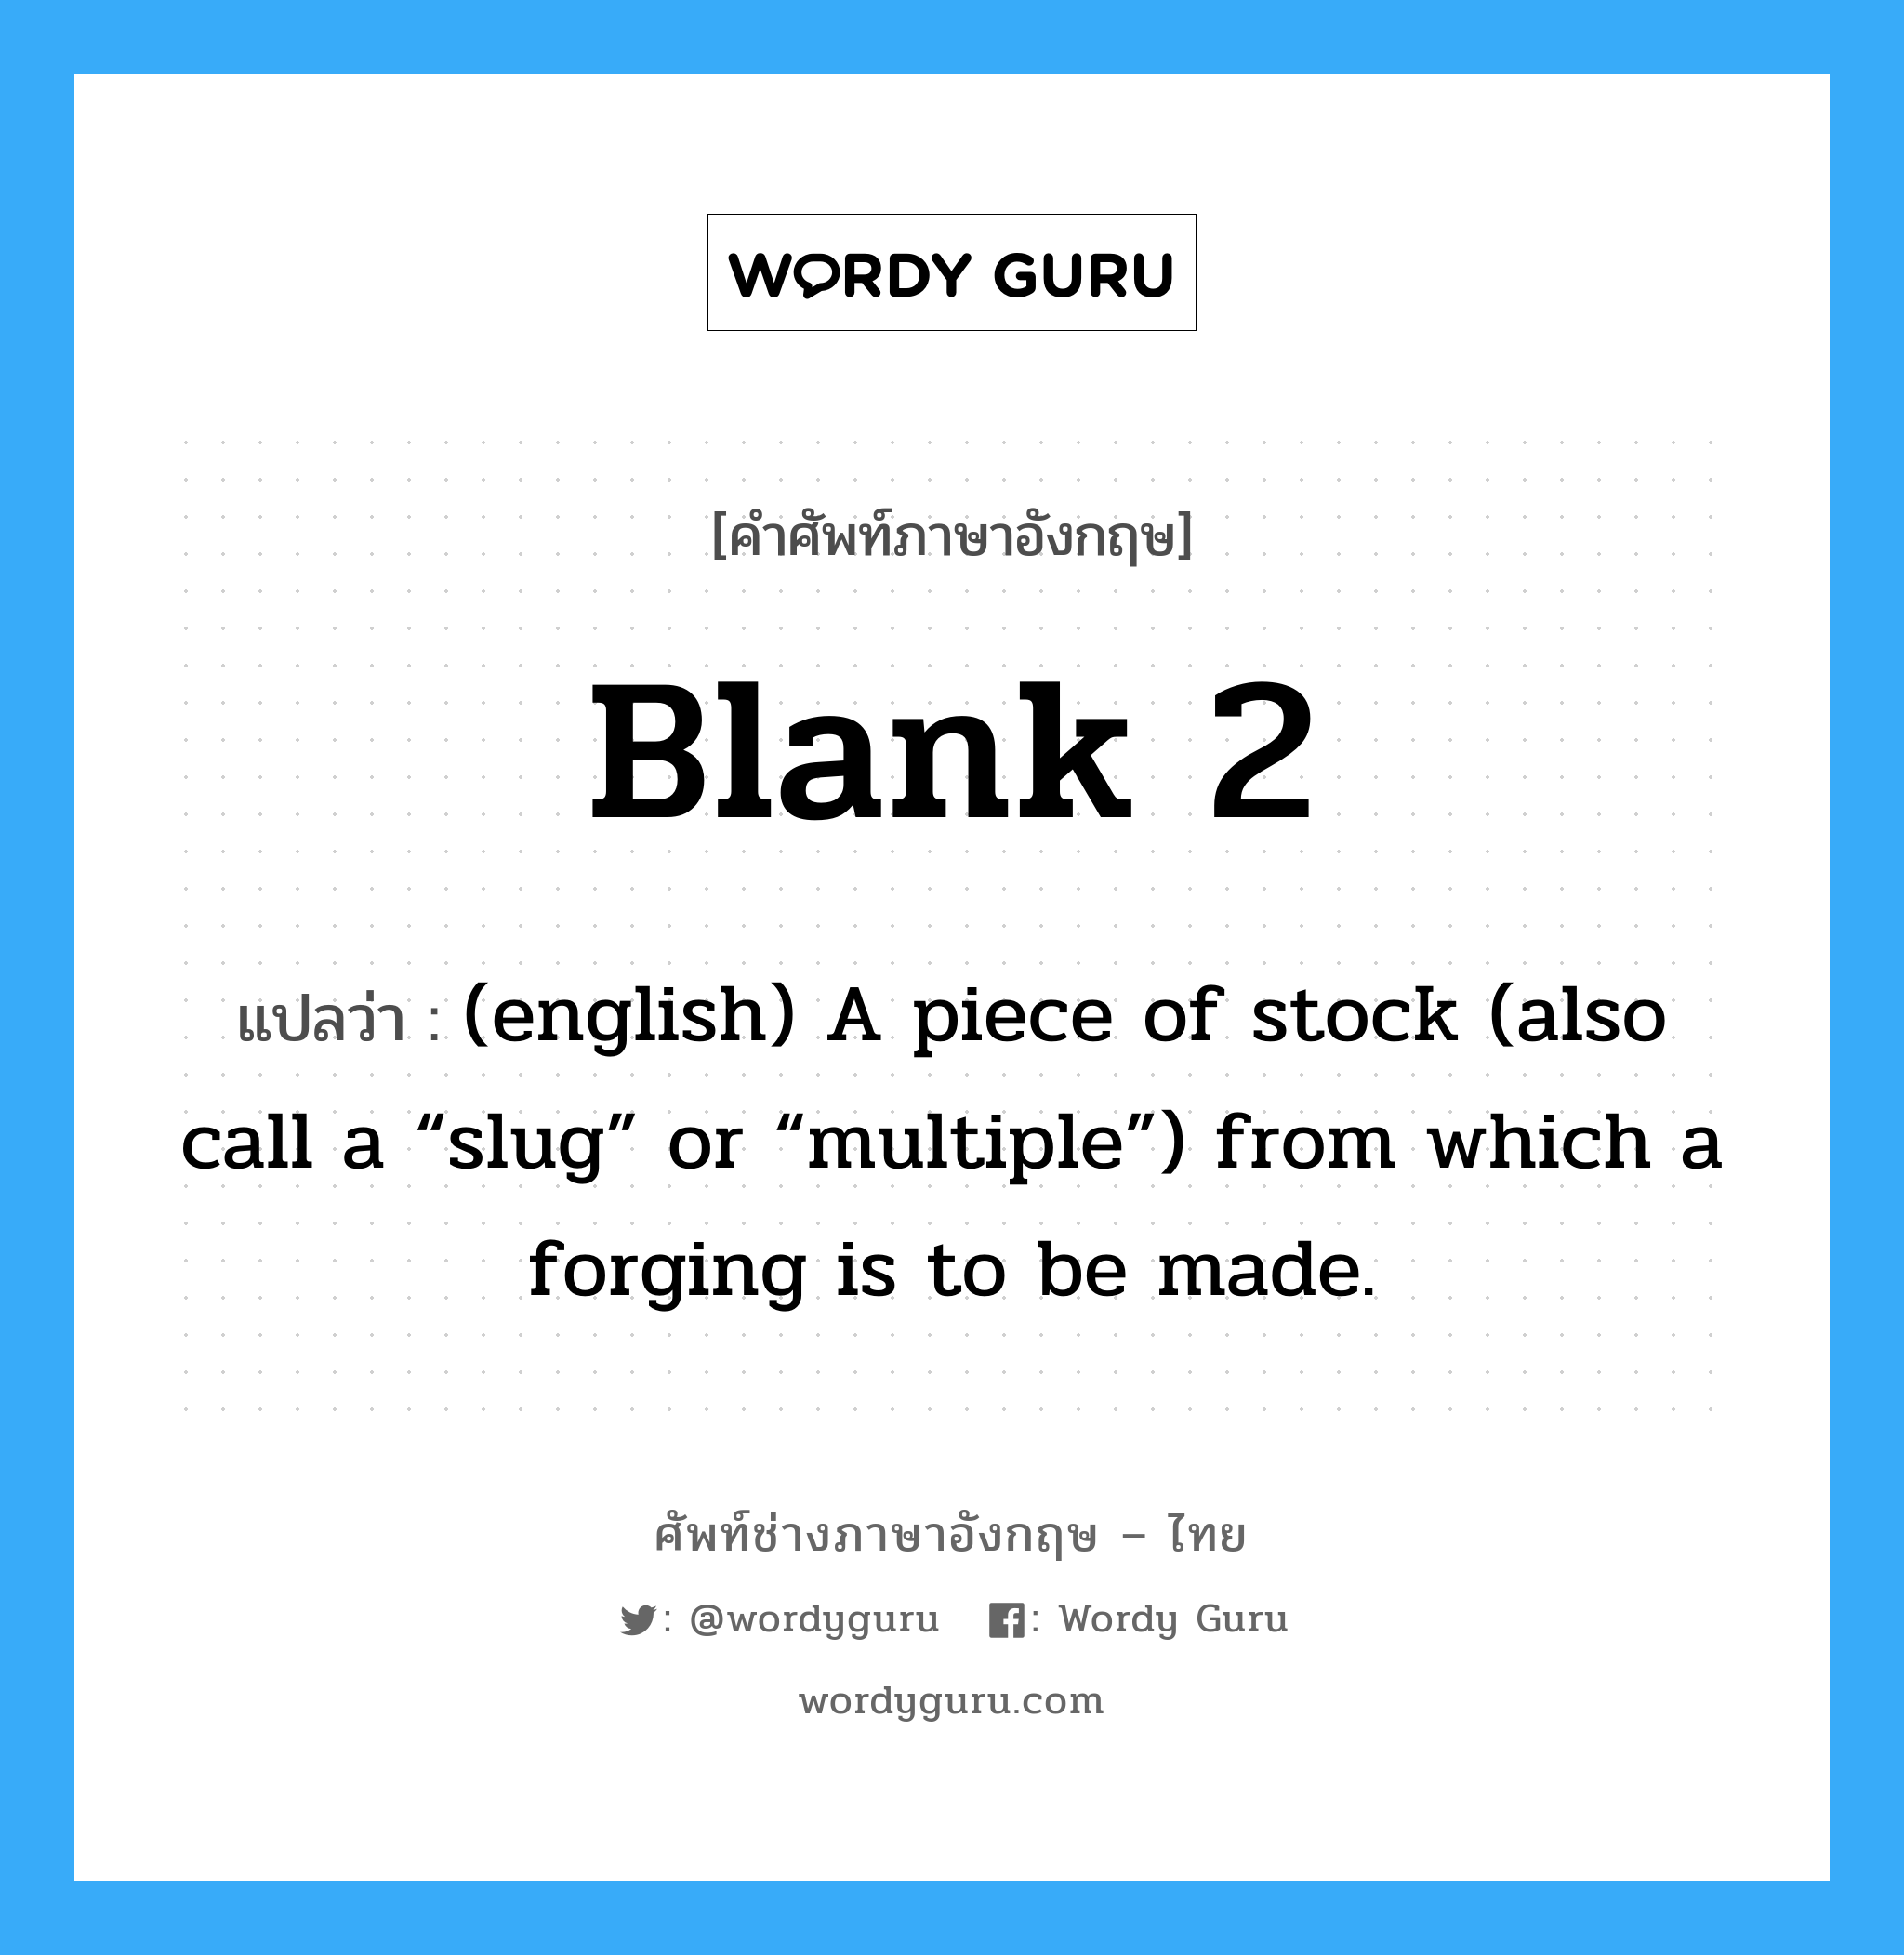 Blank 2 แปลว่า?, คำศัพท์ช่างภาษาอังกฤษ - ไทย Blank 2 คำศัพท์ภาษาอังกฤษ Blank 2 แปลว่า (english) A piece of stock (also call a “slug” or “multiple”) from which a forging is to be made.